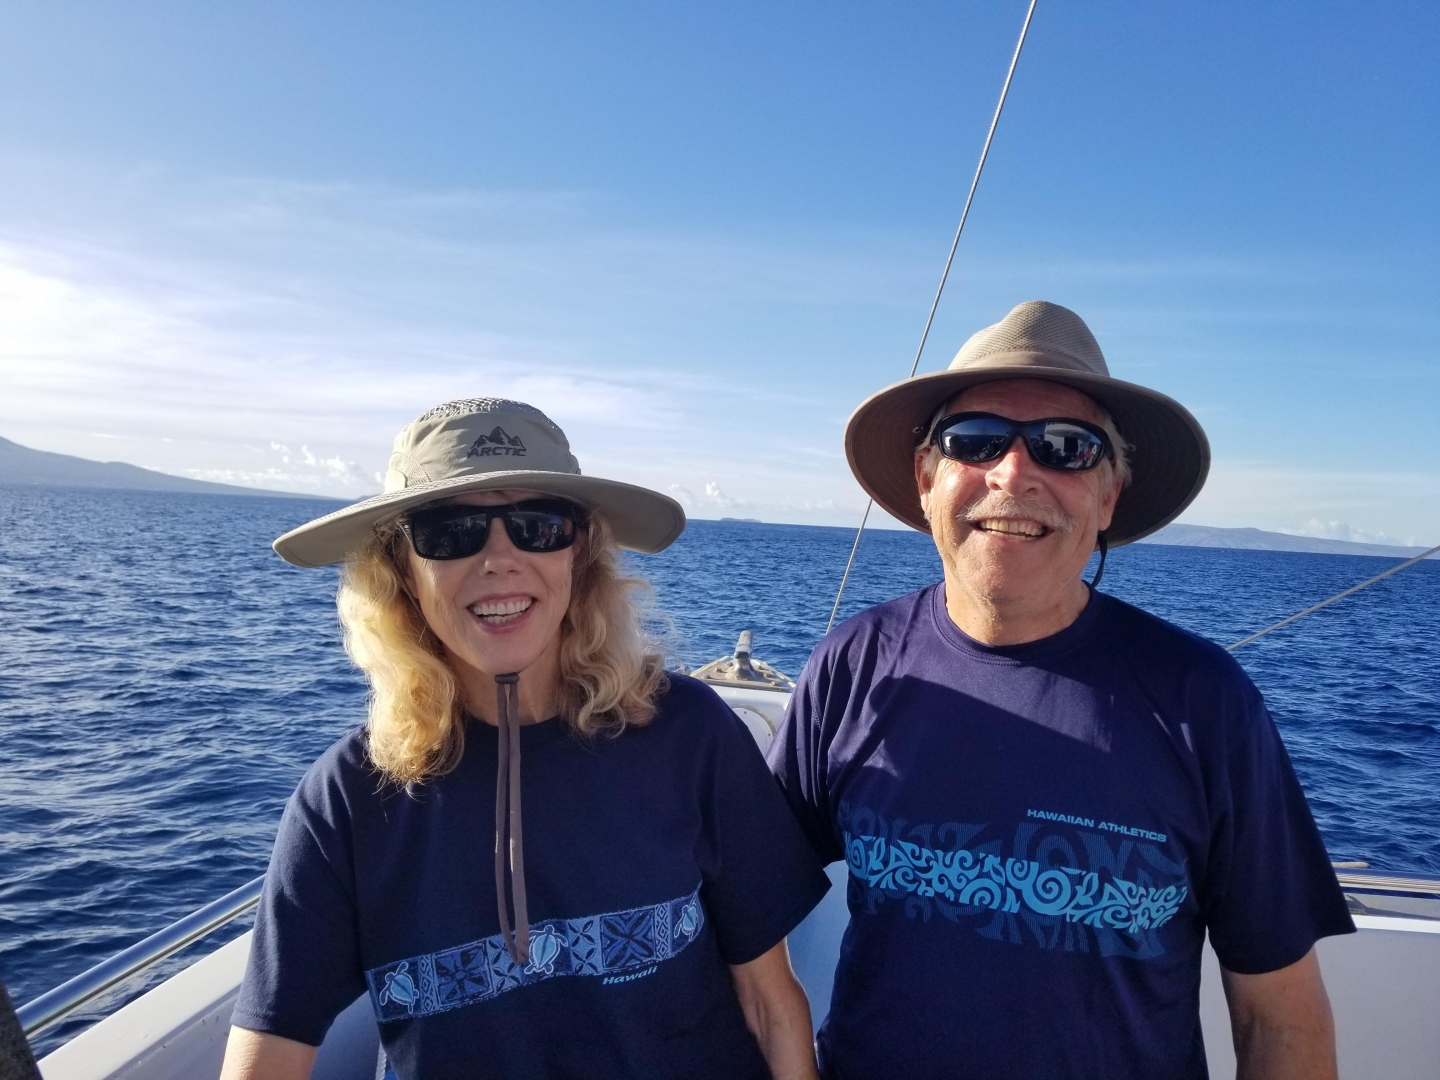 Cindy Wolff and her husband smile on a boat off the coast of Maui, with the ocean stretching behind them.